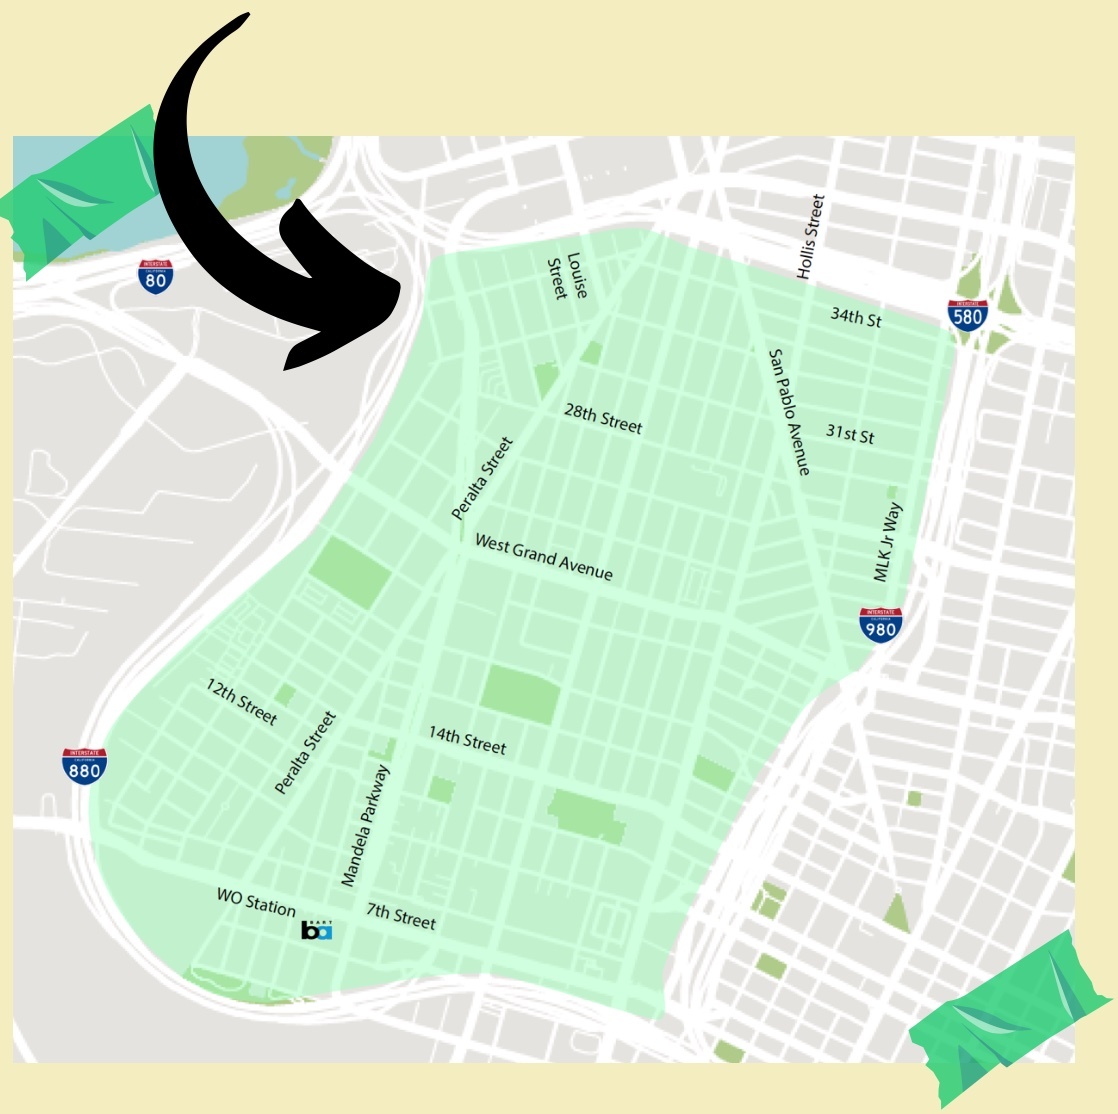 A map of West Oakland